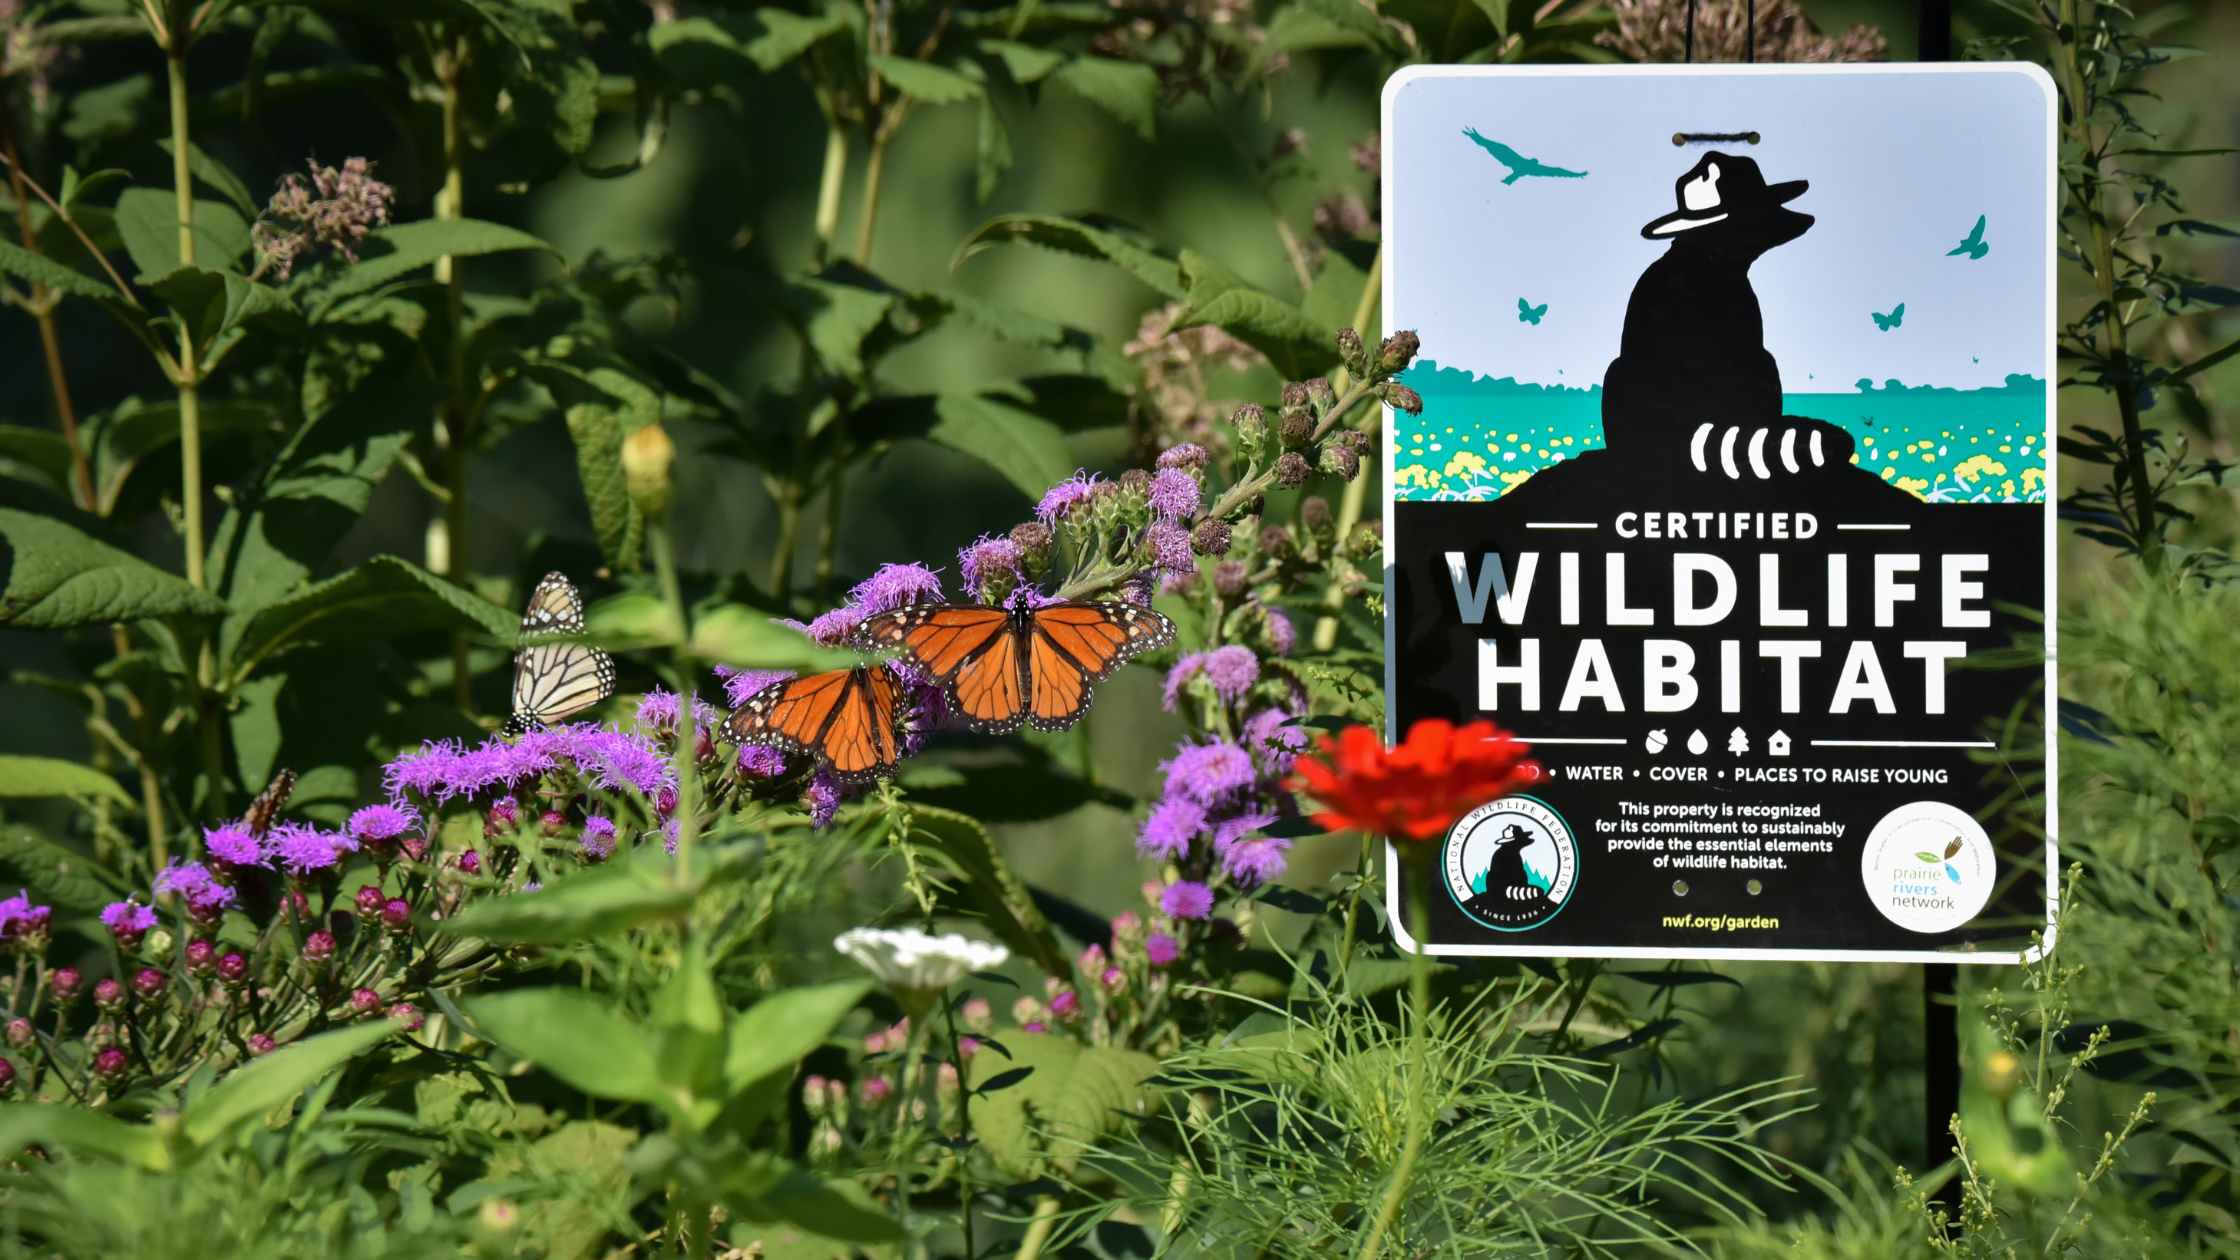 A pollinator garden with butterflies featured a Certified Wildlife Habitat sign from National Wildlife Federation